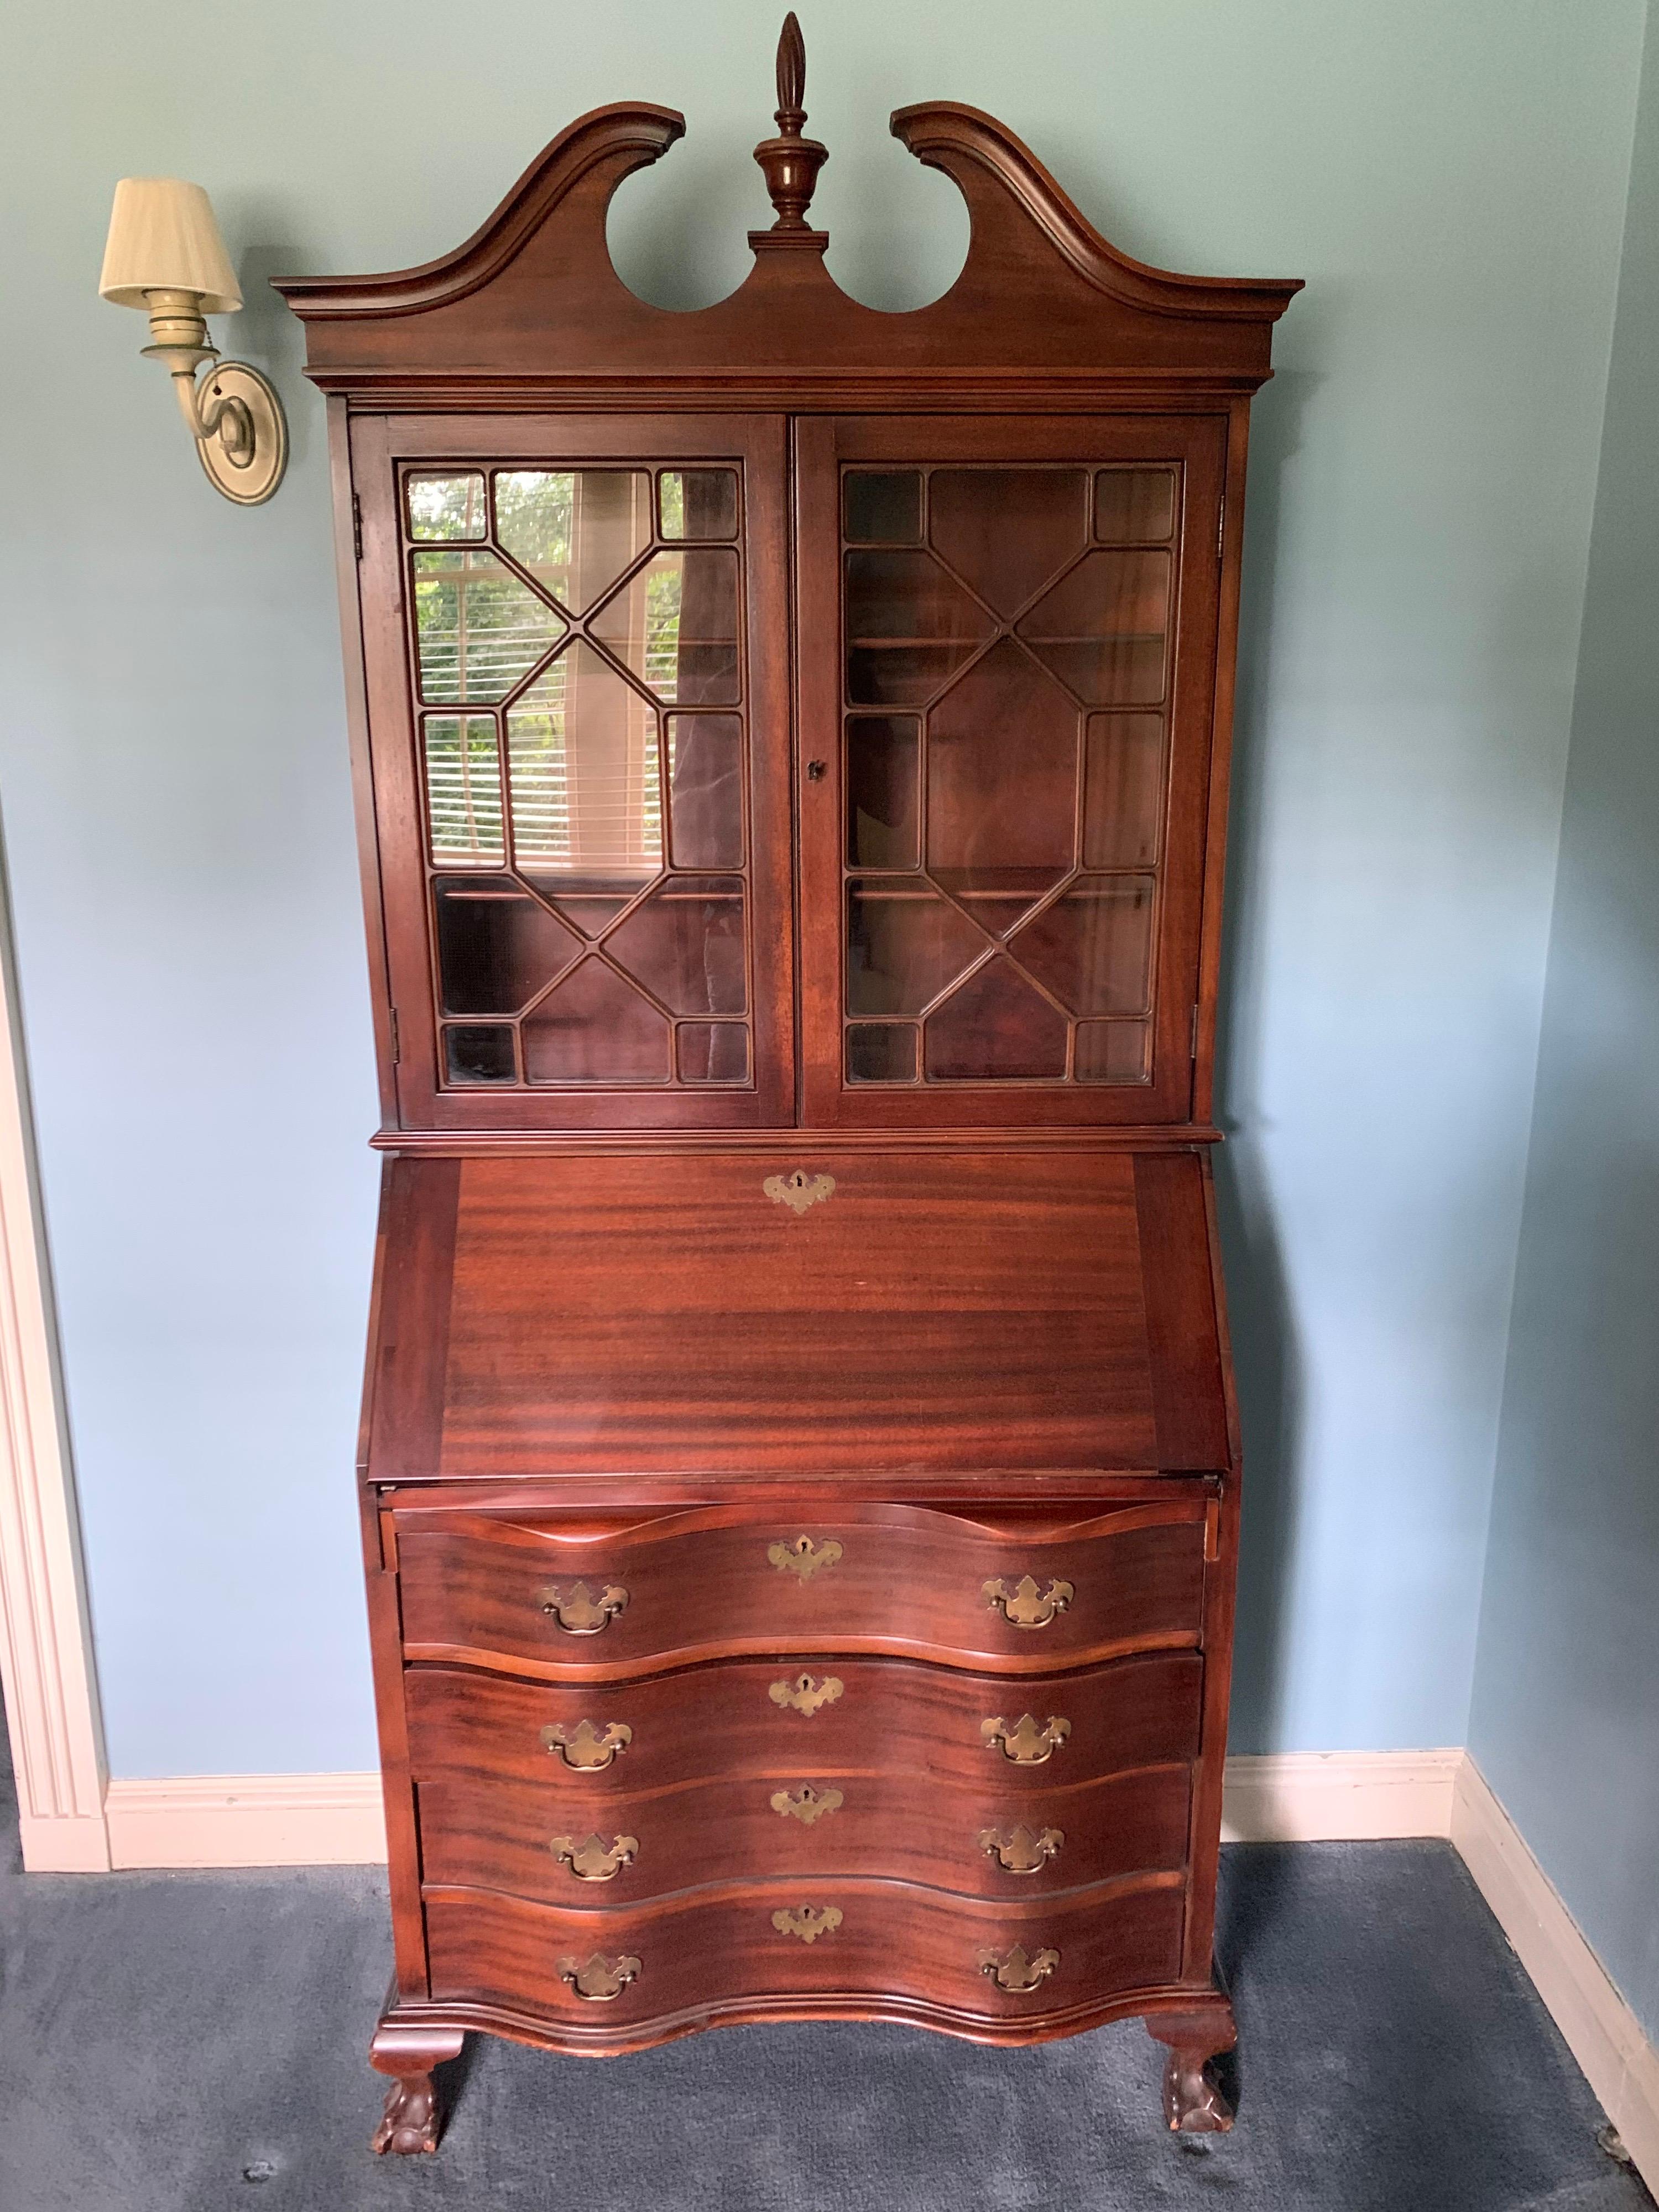 Elegant Chippendale style secretary desk handcrafted in New England, circa 1920. Features one piece construction and glass doors with fretwork. The desk flips open to become a full secretary when needed.
  